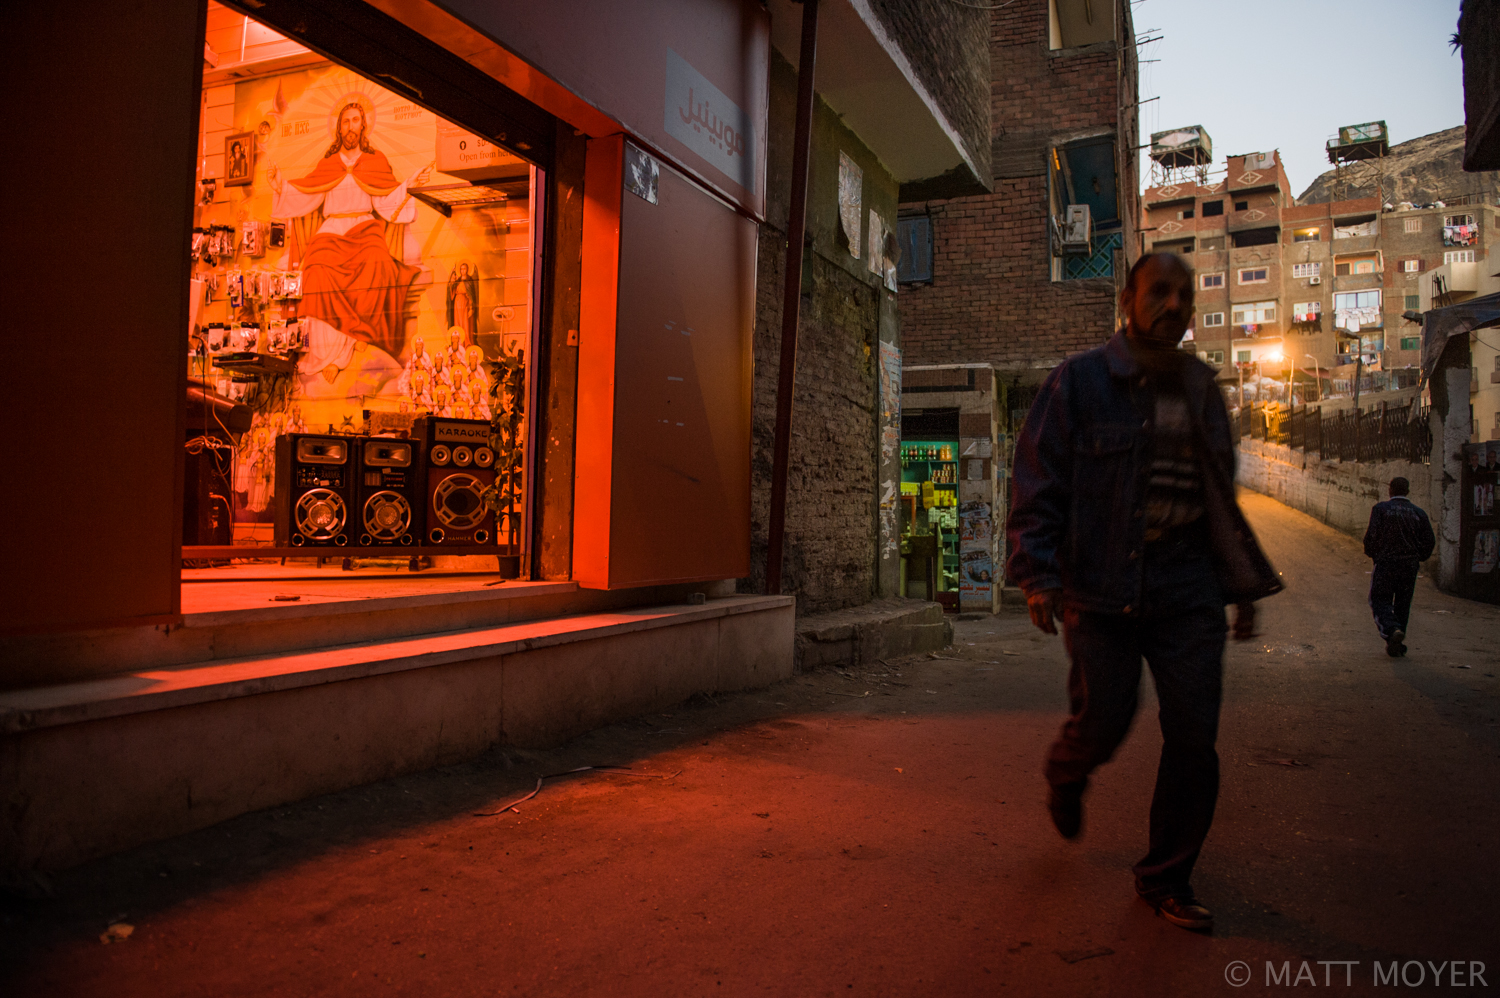  An Egyptian man passes a mobile phone store with a huge mural of Christ in a Christian neighborhood in Cairo, Egypt. Many Christian Egyptians have expressed concern with the unpredictable political situation in their country, the growing power of Is